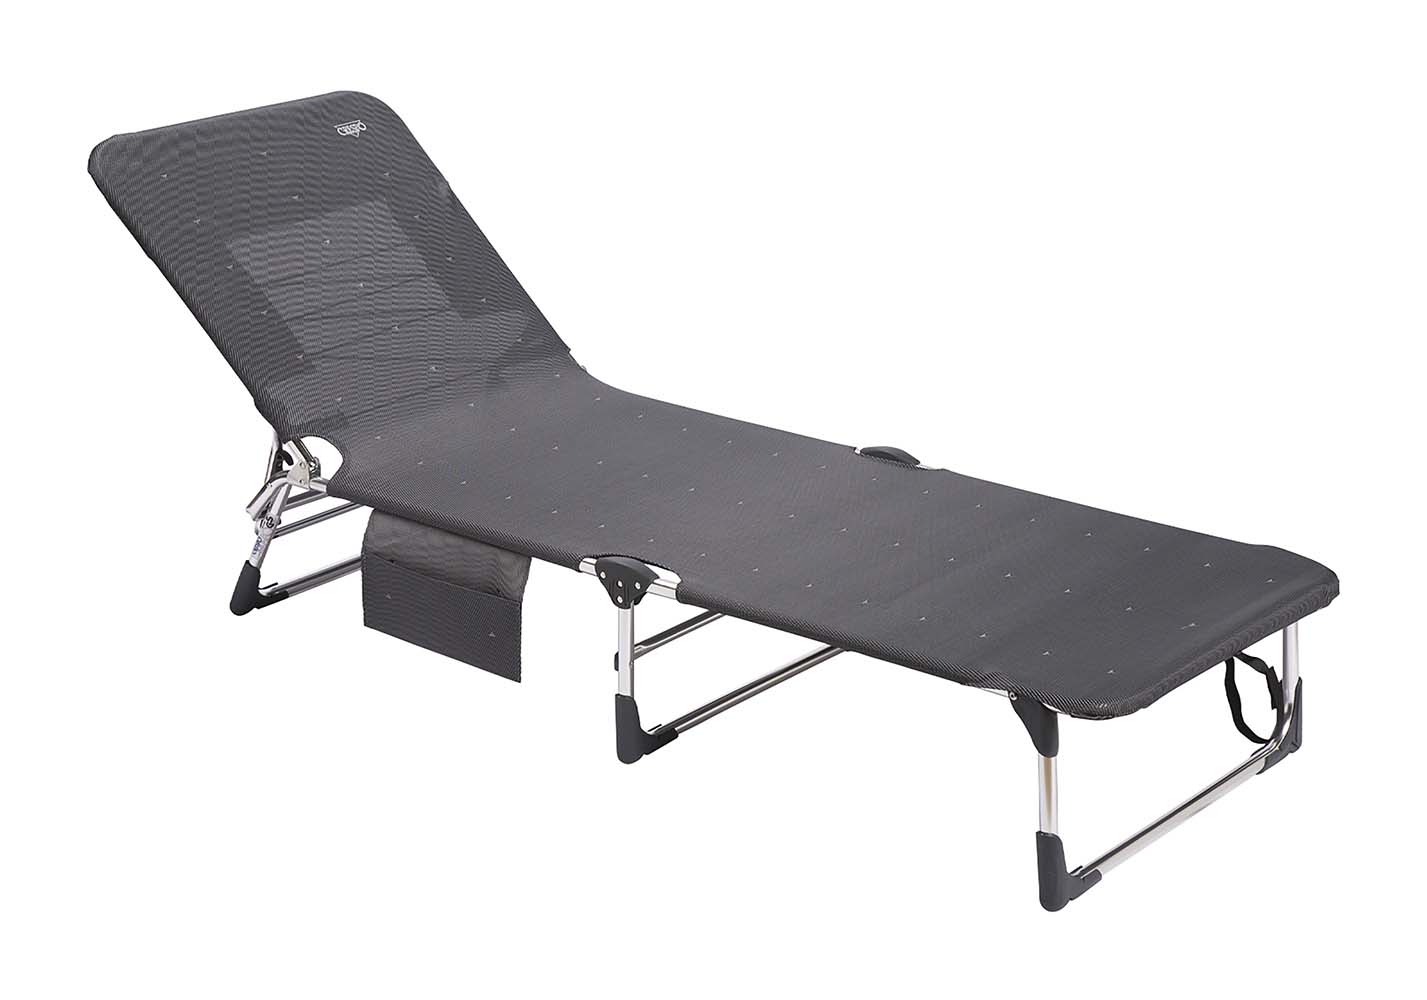 1148267 A highly comfortable sun lounger. This sun lounger is elevated and features easy entry and exit. After use, the lounger can be quickly and easily folded to a very flat position.